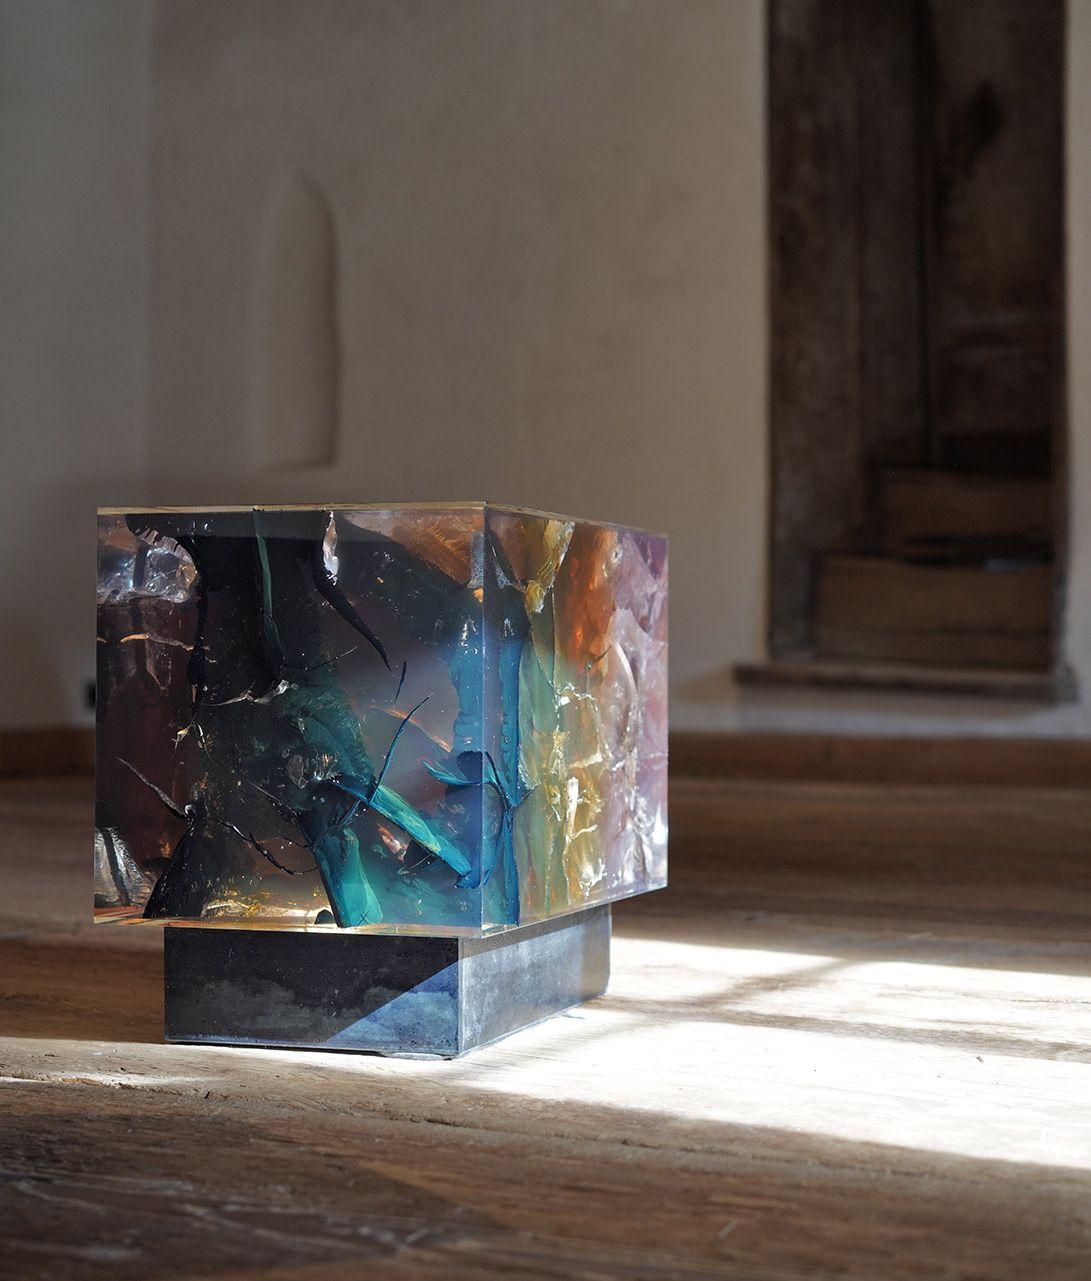 Synthesis 6 is a sculpture by contemporary artist Tom Price. This sculpture is made of resin, tar, steel, acrylic and LED, dimensions are 45 × 51 × 35 cm (17.7 × 20.1 × 13.8 in). 
This artwork is available on commission. It will be created on the